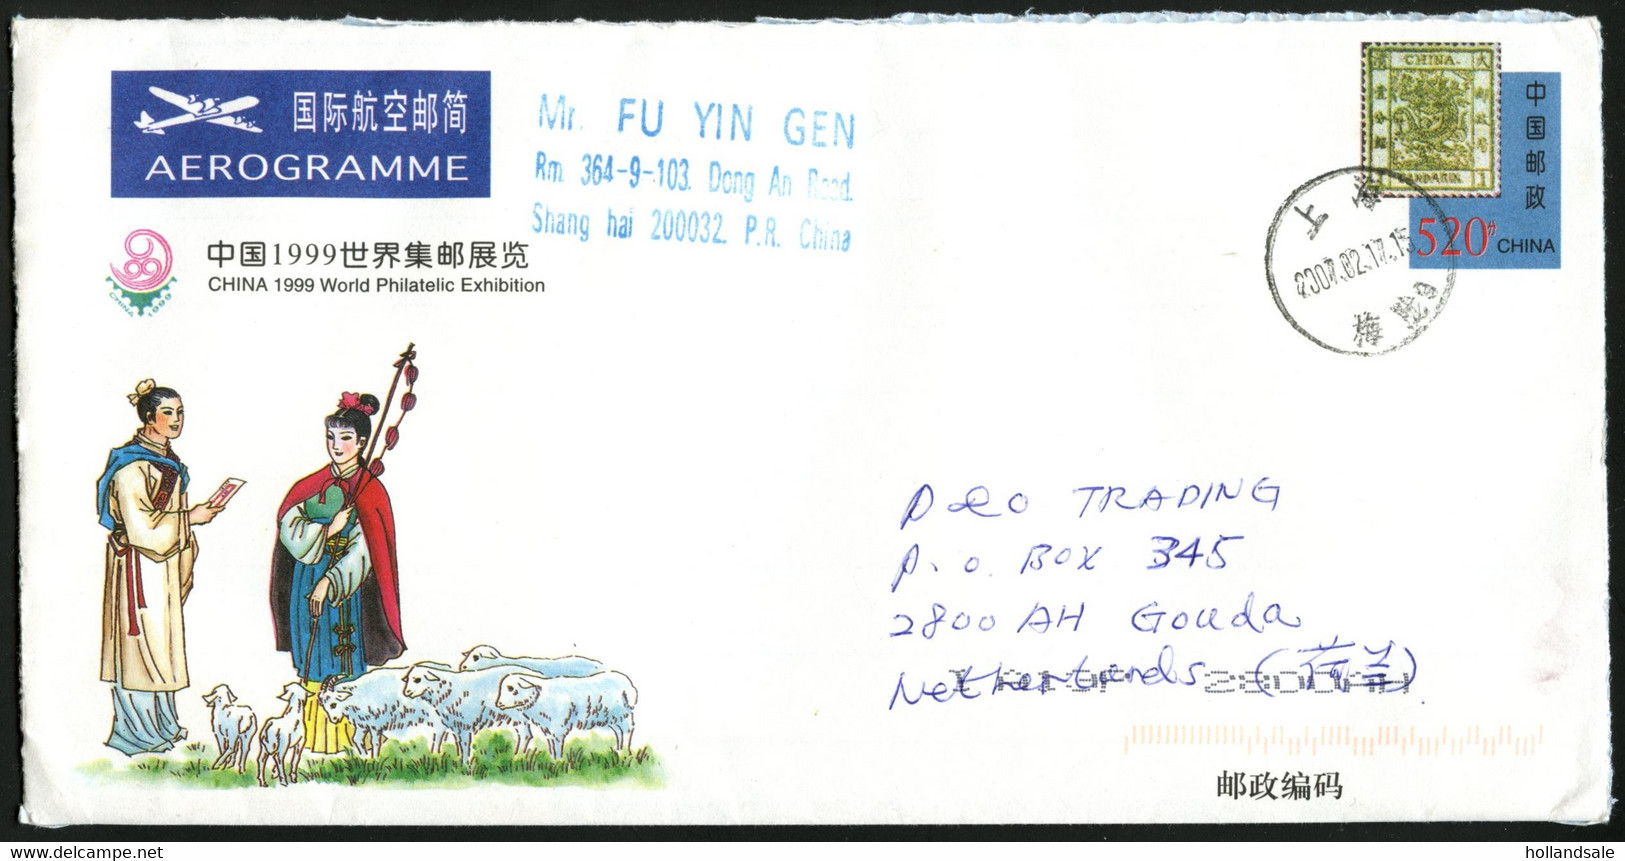 CHINA PRC - Special Aerogrammae Issued For The China 1999 World Philatelic Exhibition. Sent To Netherlands. - Aérogrammes